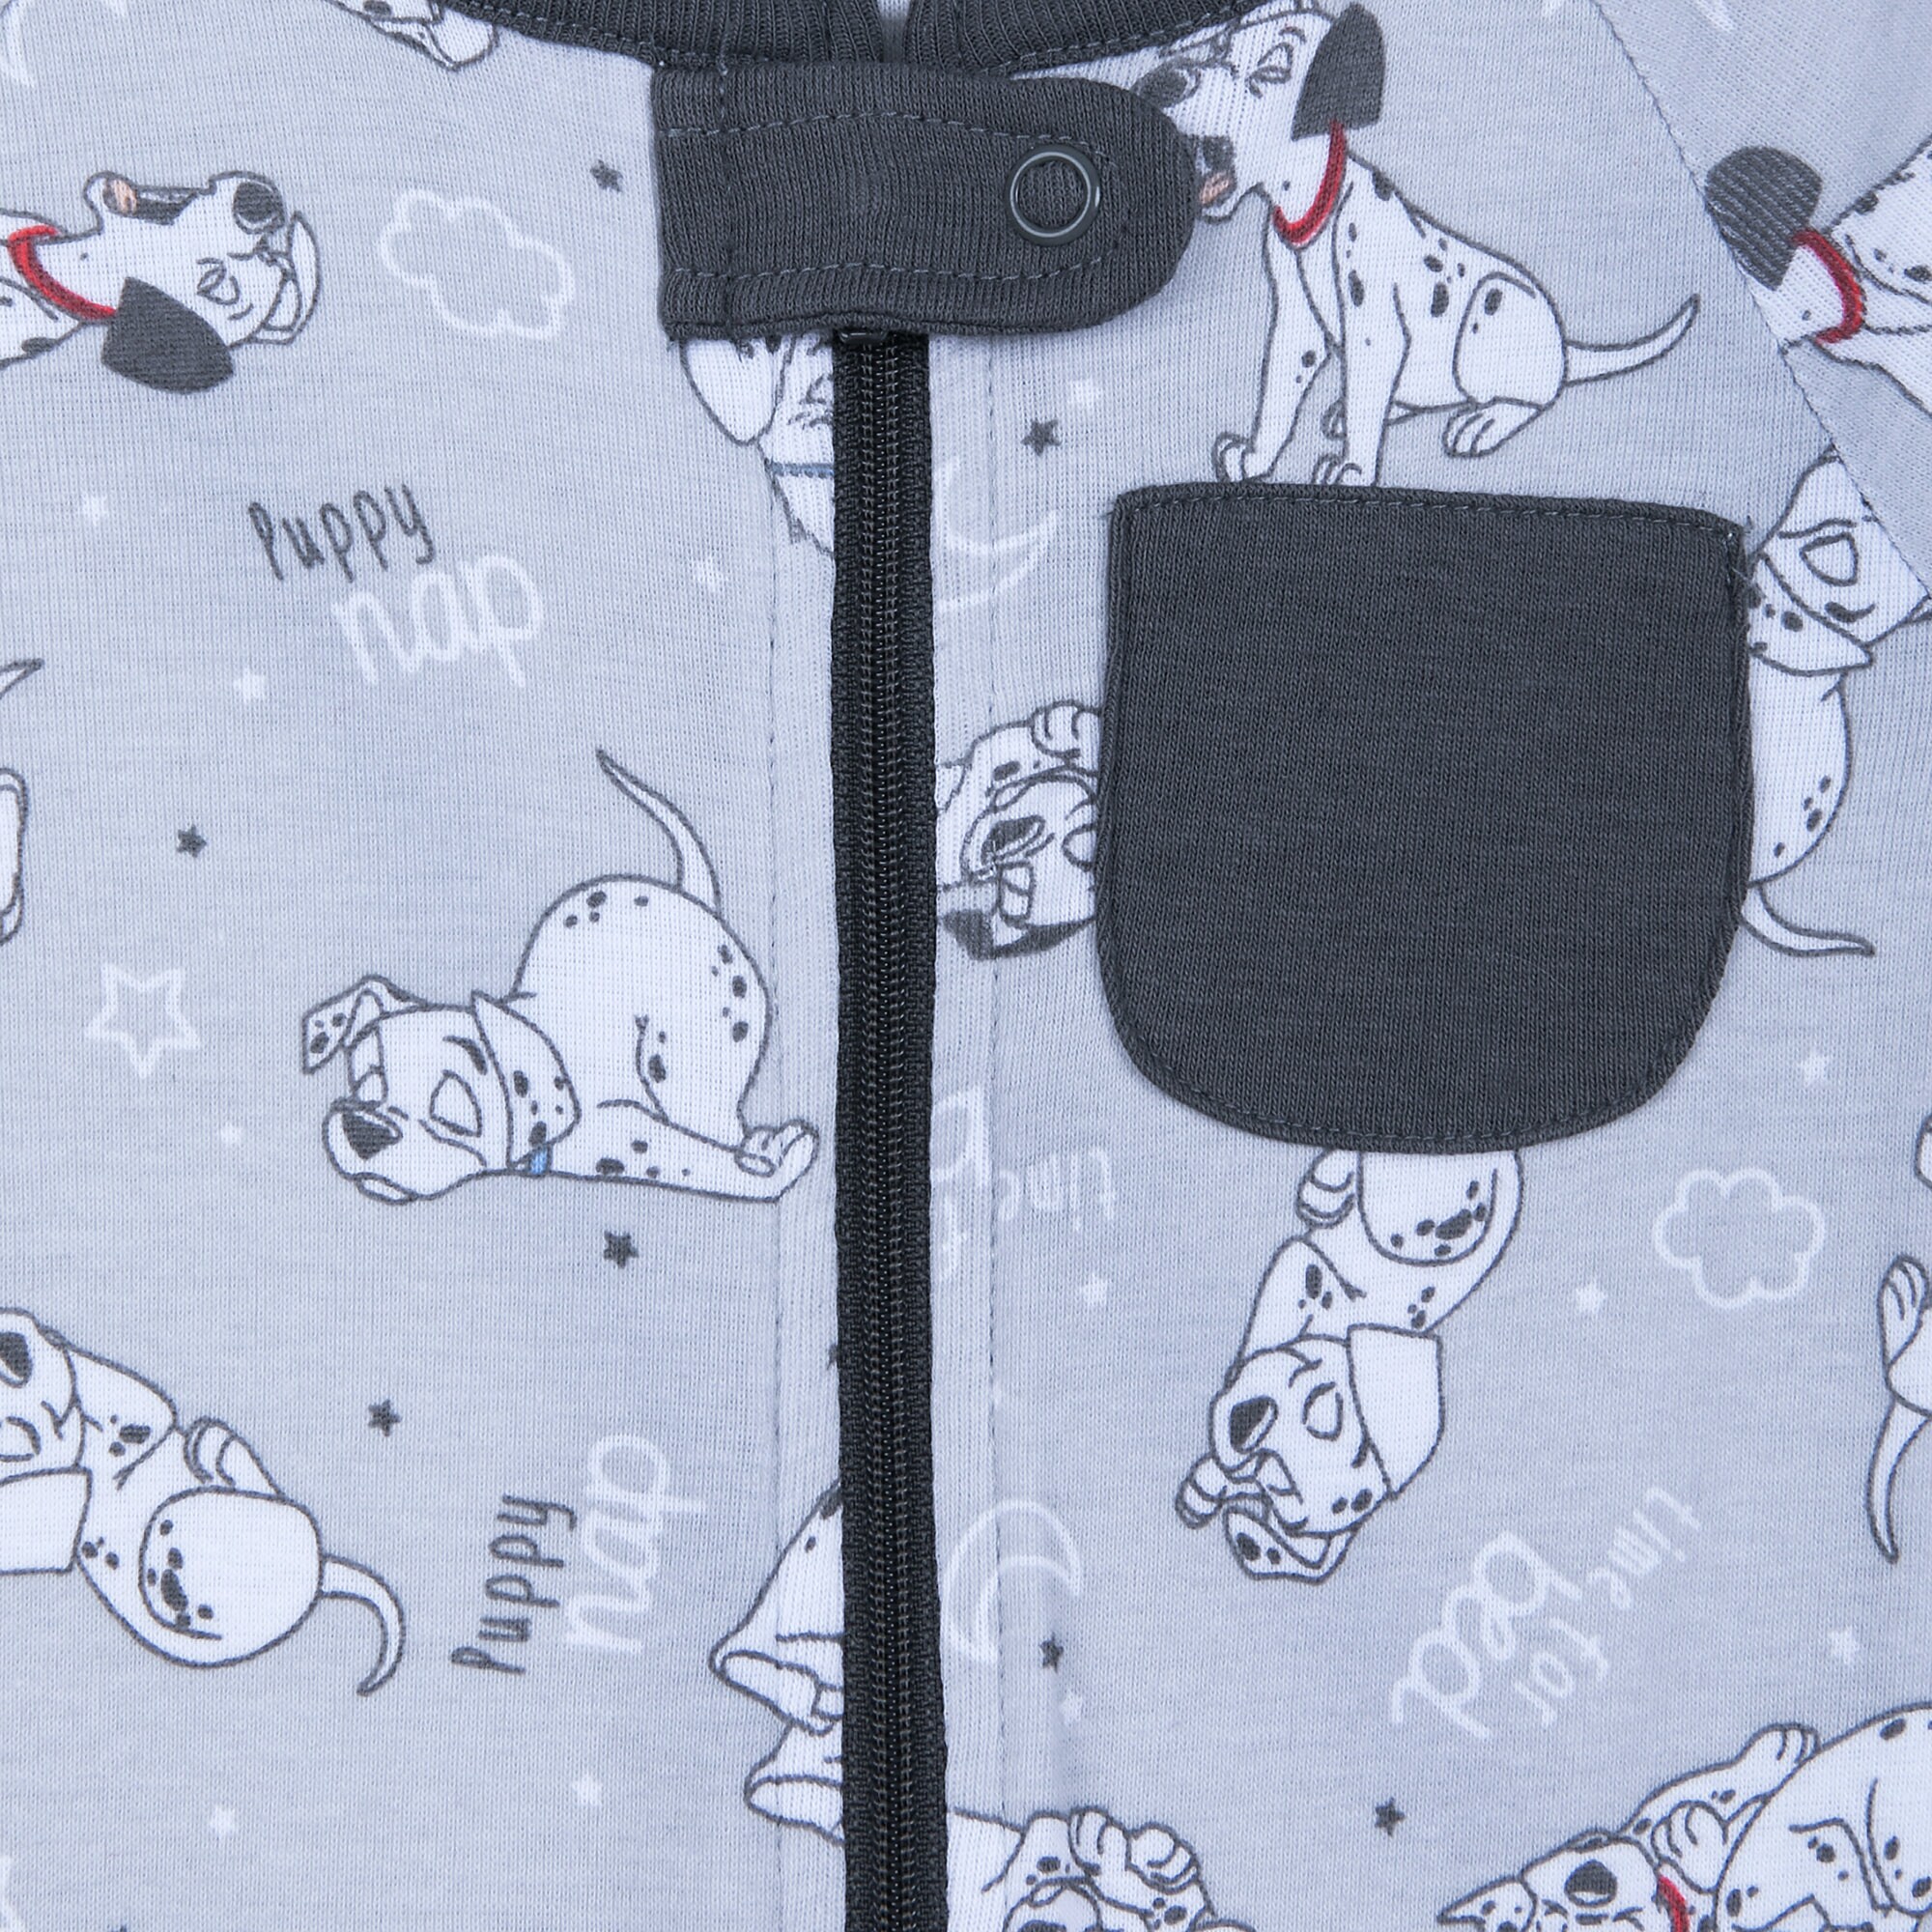 101 Dalmatians Stretchie Sleeper for Baby